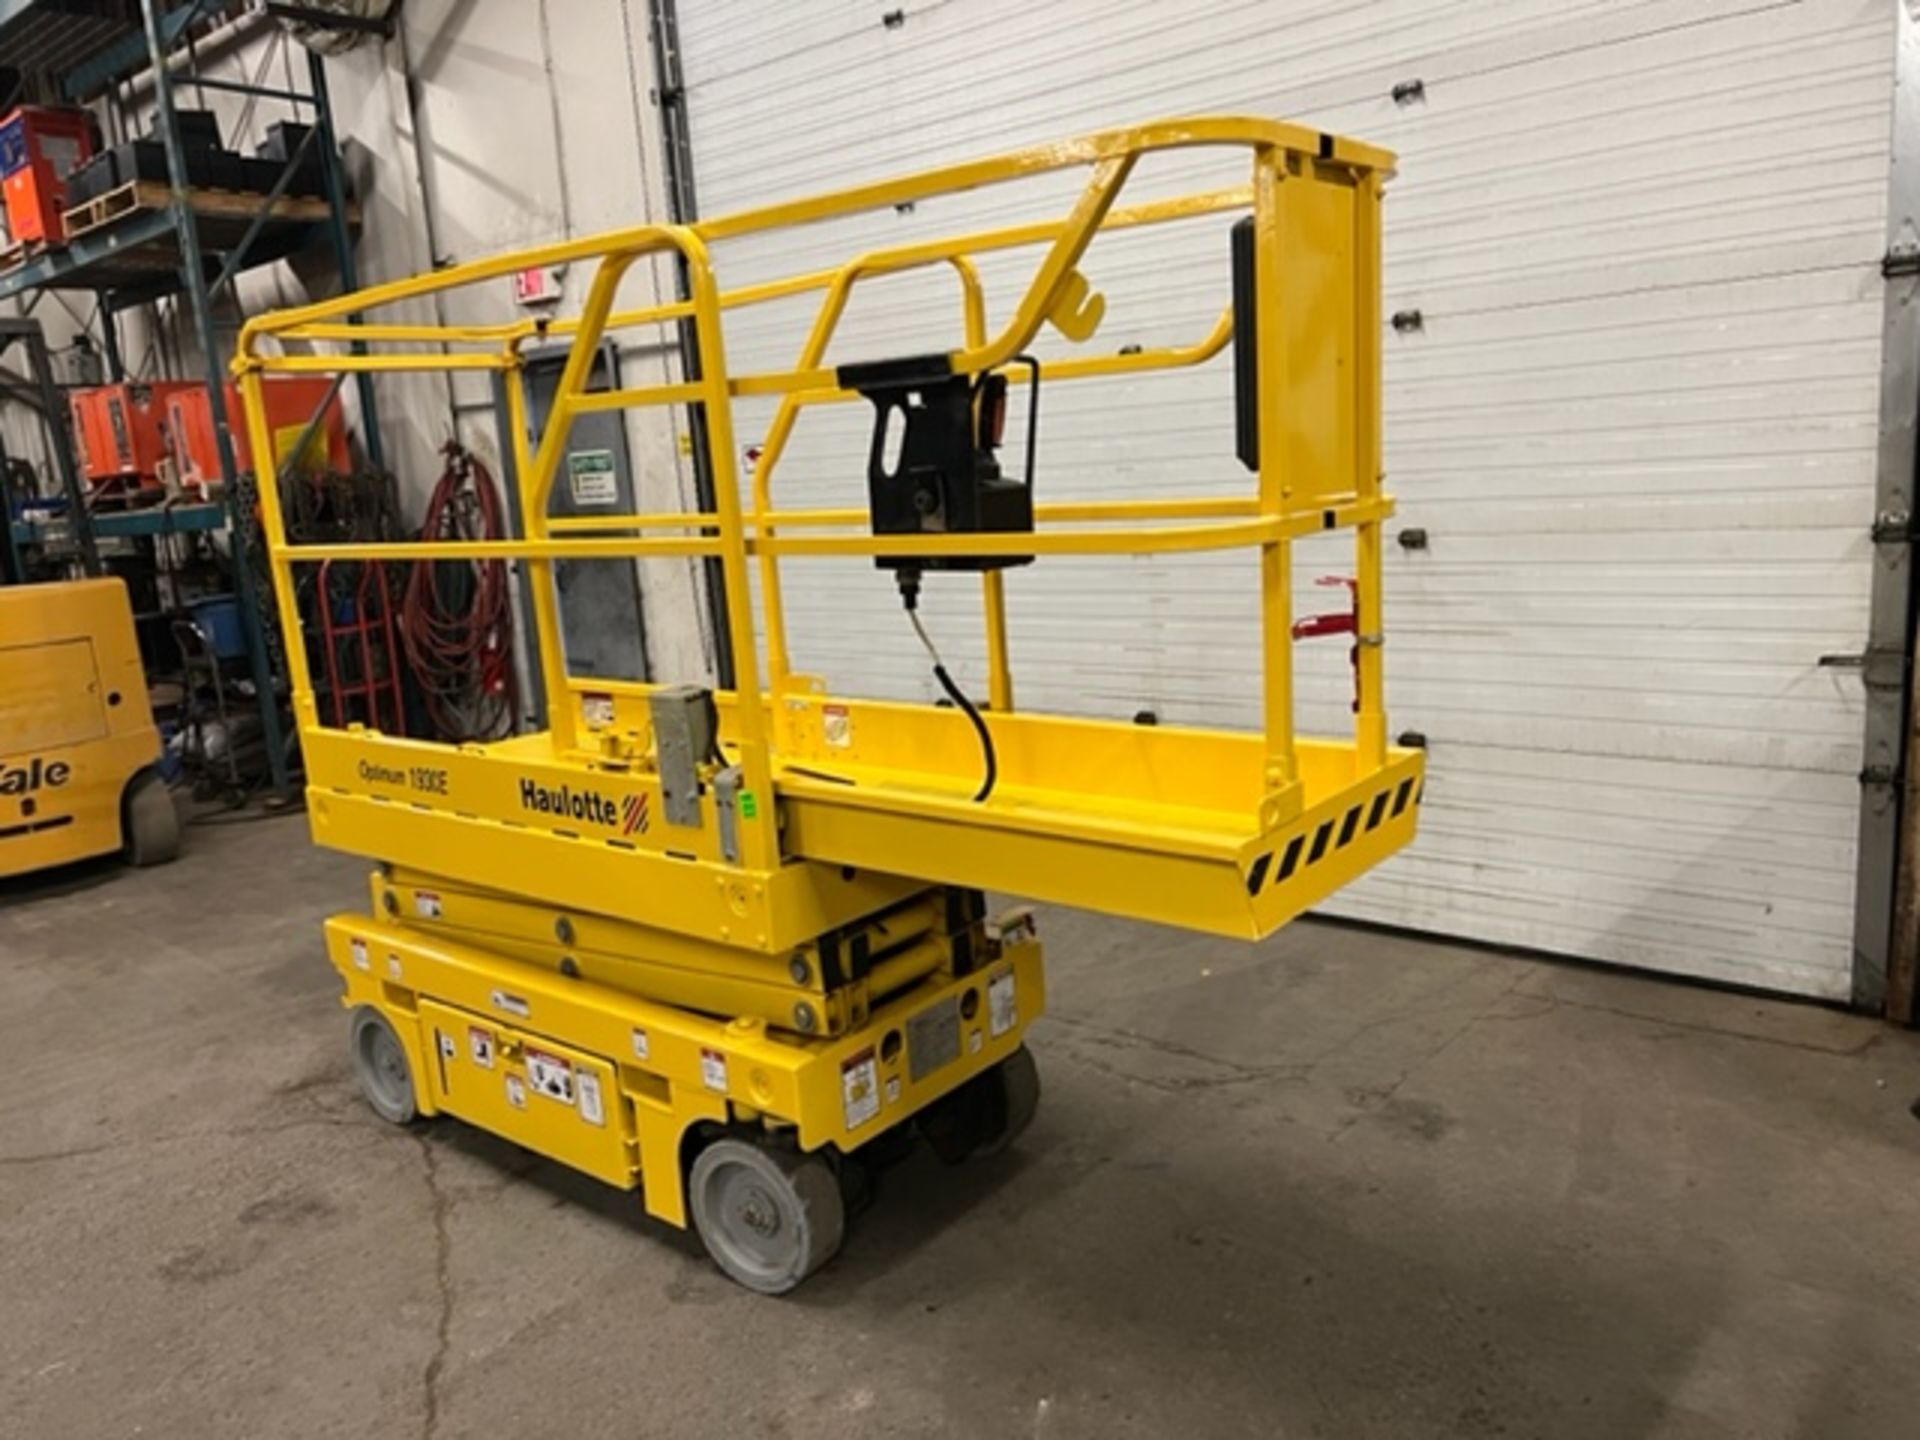 2015 Haulotte 1930E Electric Scissor Lift 500lbs Capacity with 19' platform height 24V unit with